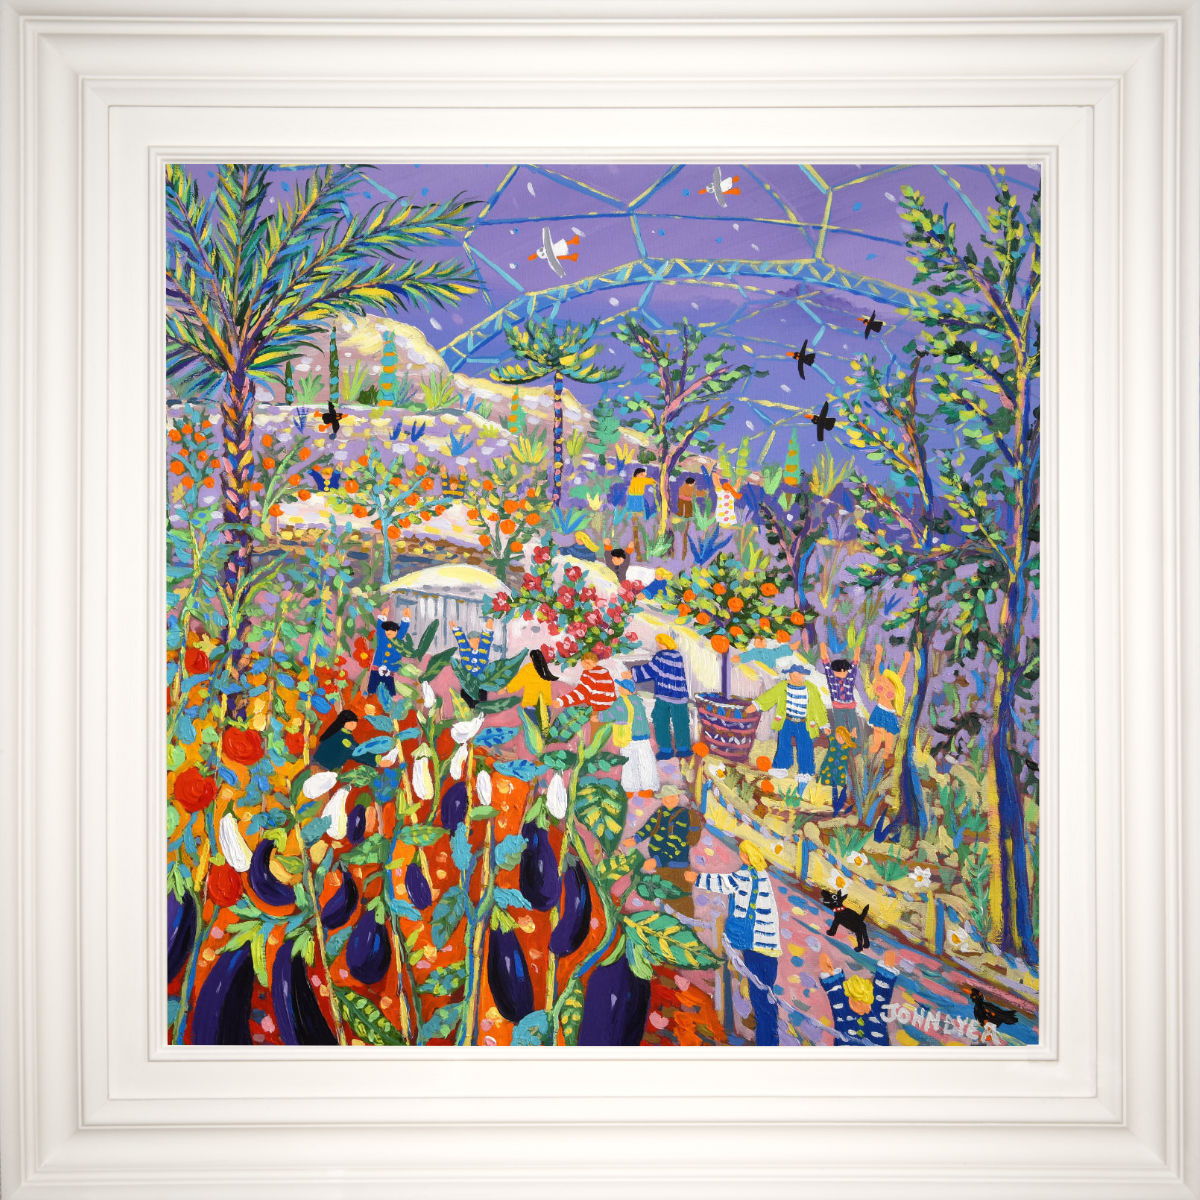 'Mediterranean Colour, Eden Project'. 24x24 inches acrylic on canvas. Garden Paintings of Cornwall by John Dyer from our Cornwall Art Gallery